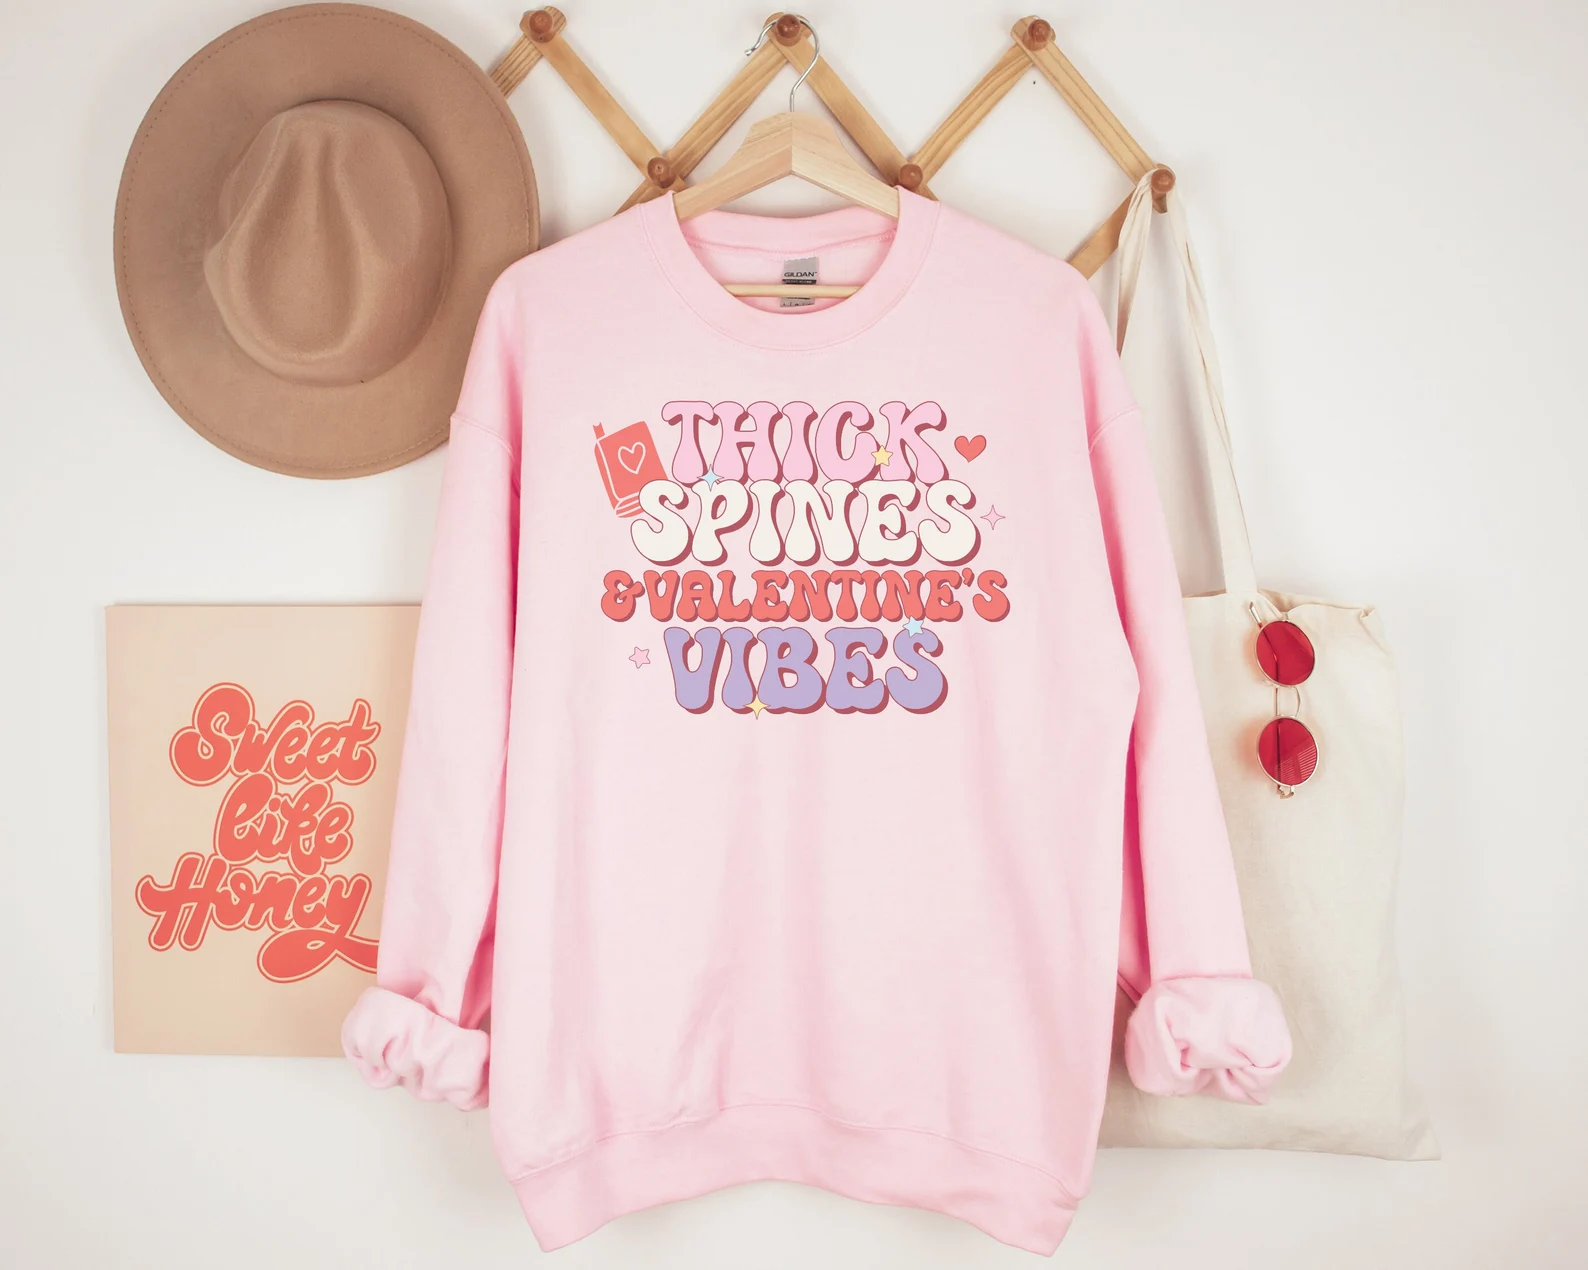 image of a pink sweatshirt with the text "thick spines and valentine's vibes."